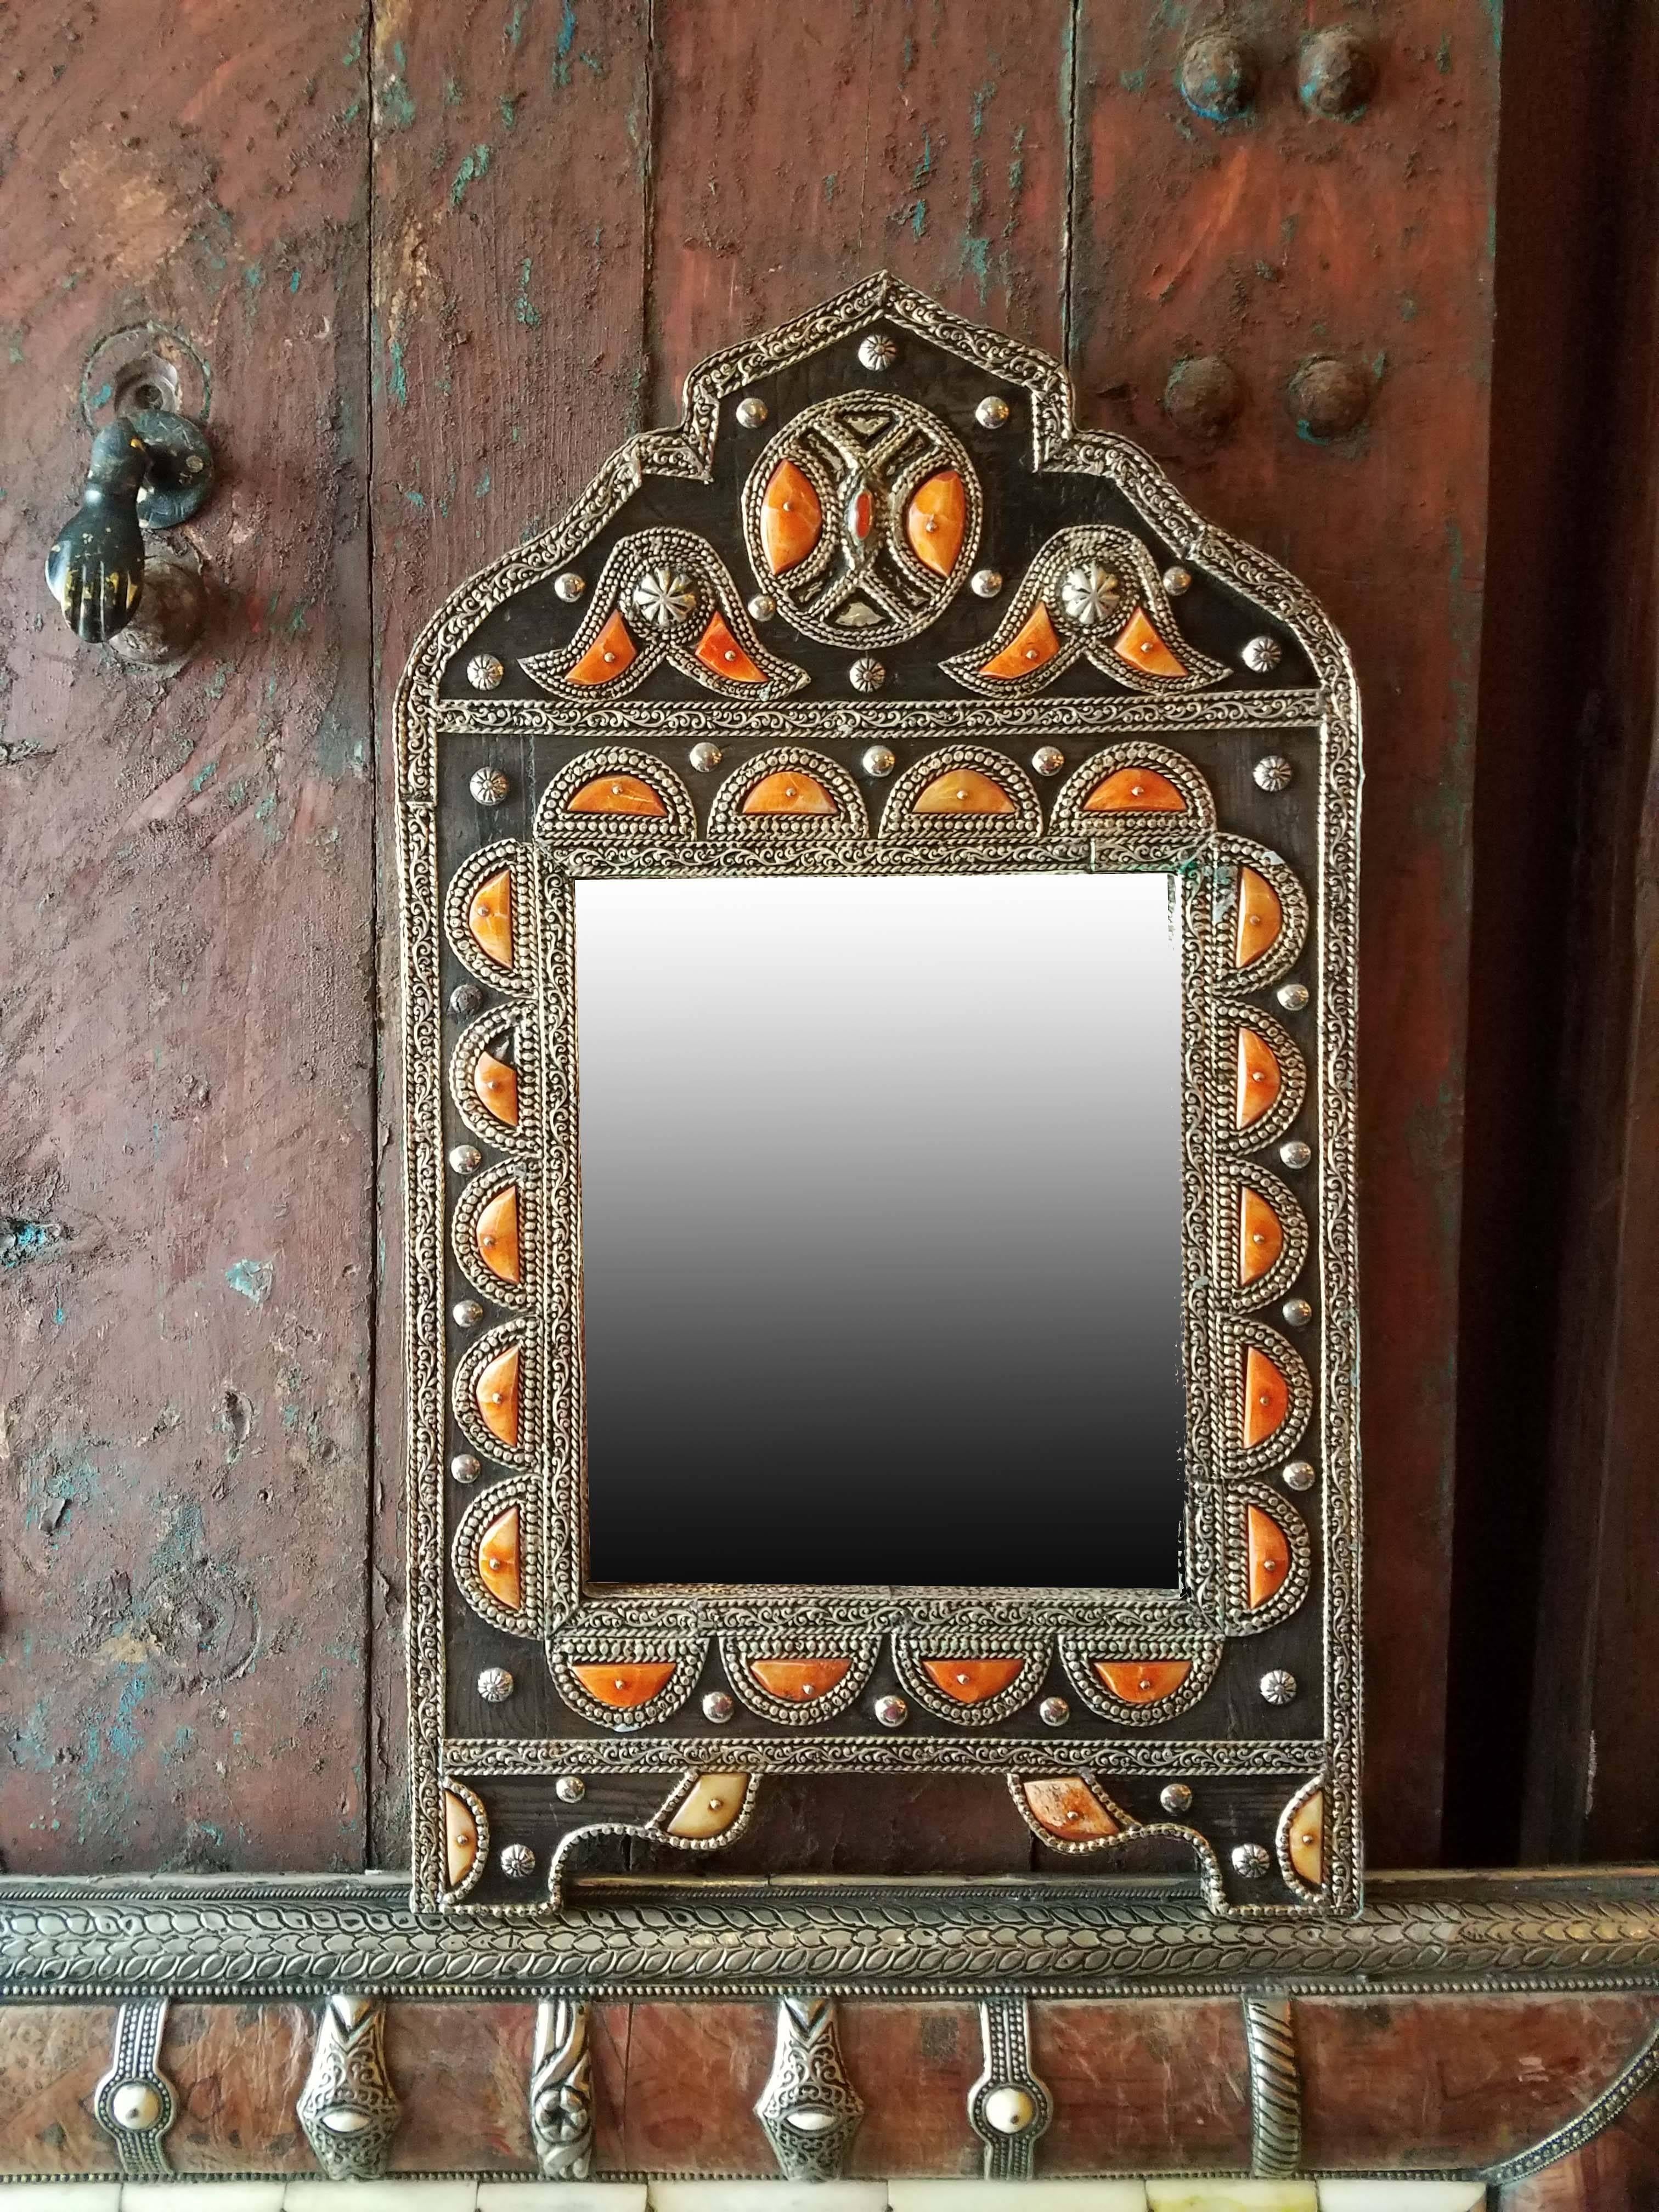 Kasbah Arched Moroccan Metal Inlaid Mirror, Marrakech For Sale 2